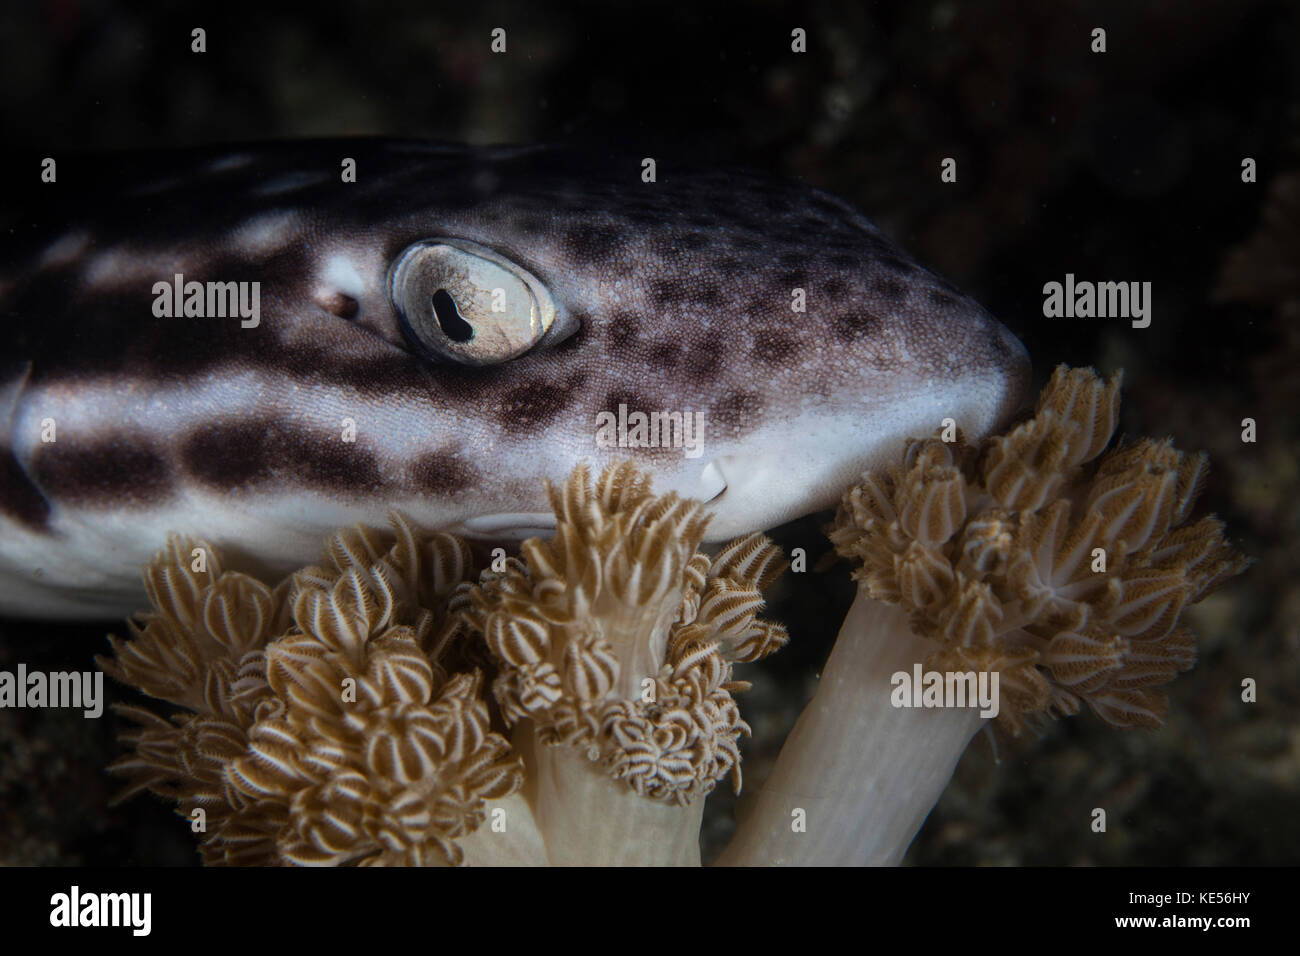 A coral catshark rests on the seafloor in Komodo National Park, Indonesia. Stock Photo